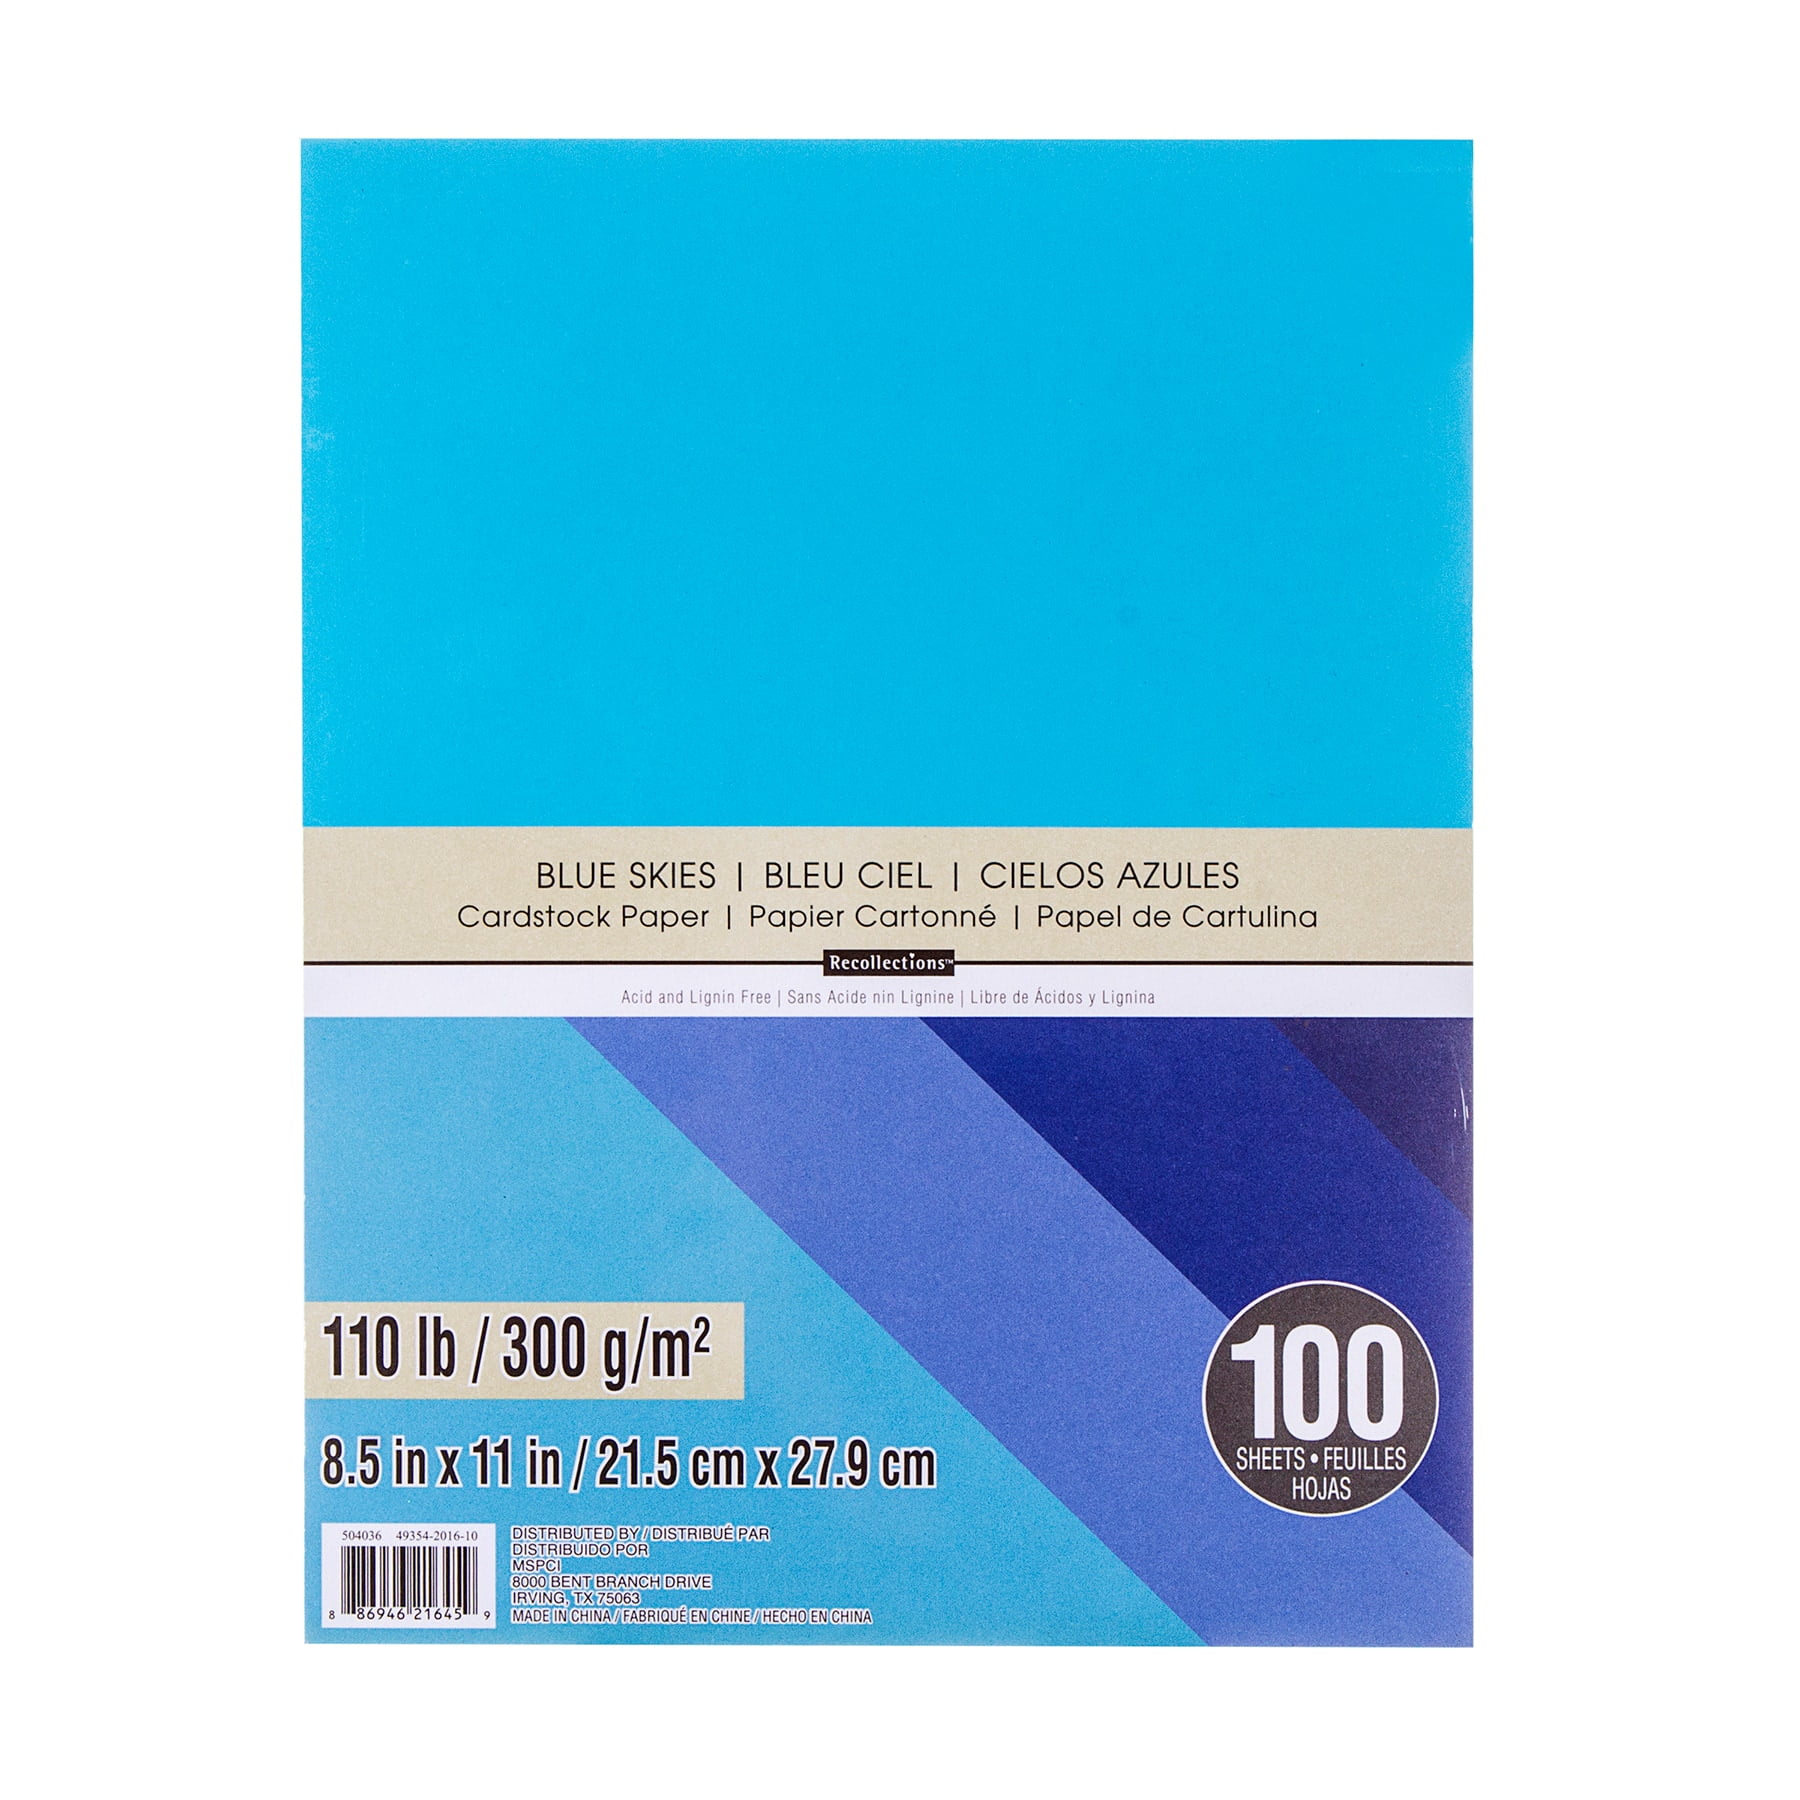 Recollections Black Heavyweight Cardstock Paper, 8.5 inch x 11 inch - 100 Sheets